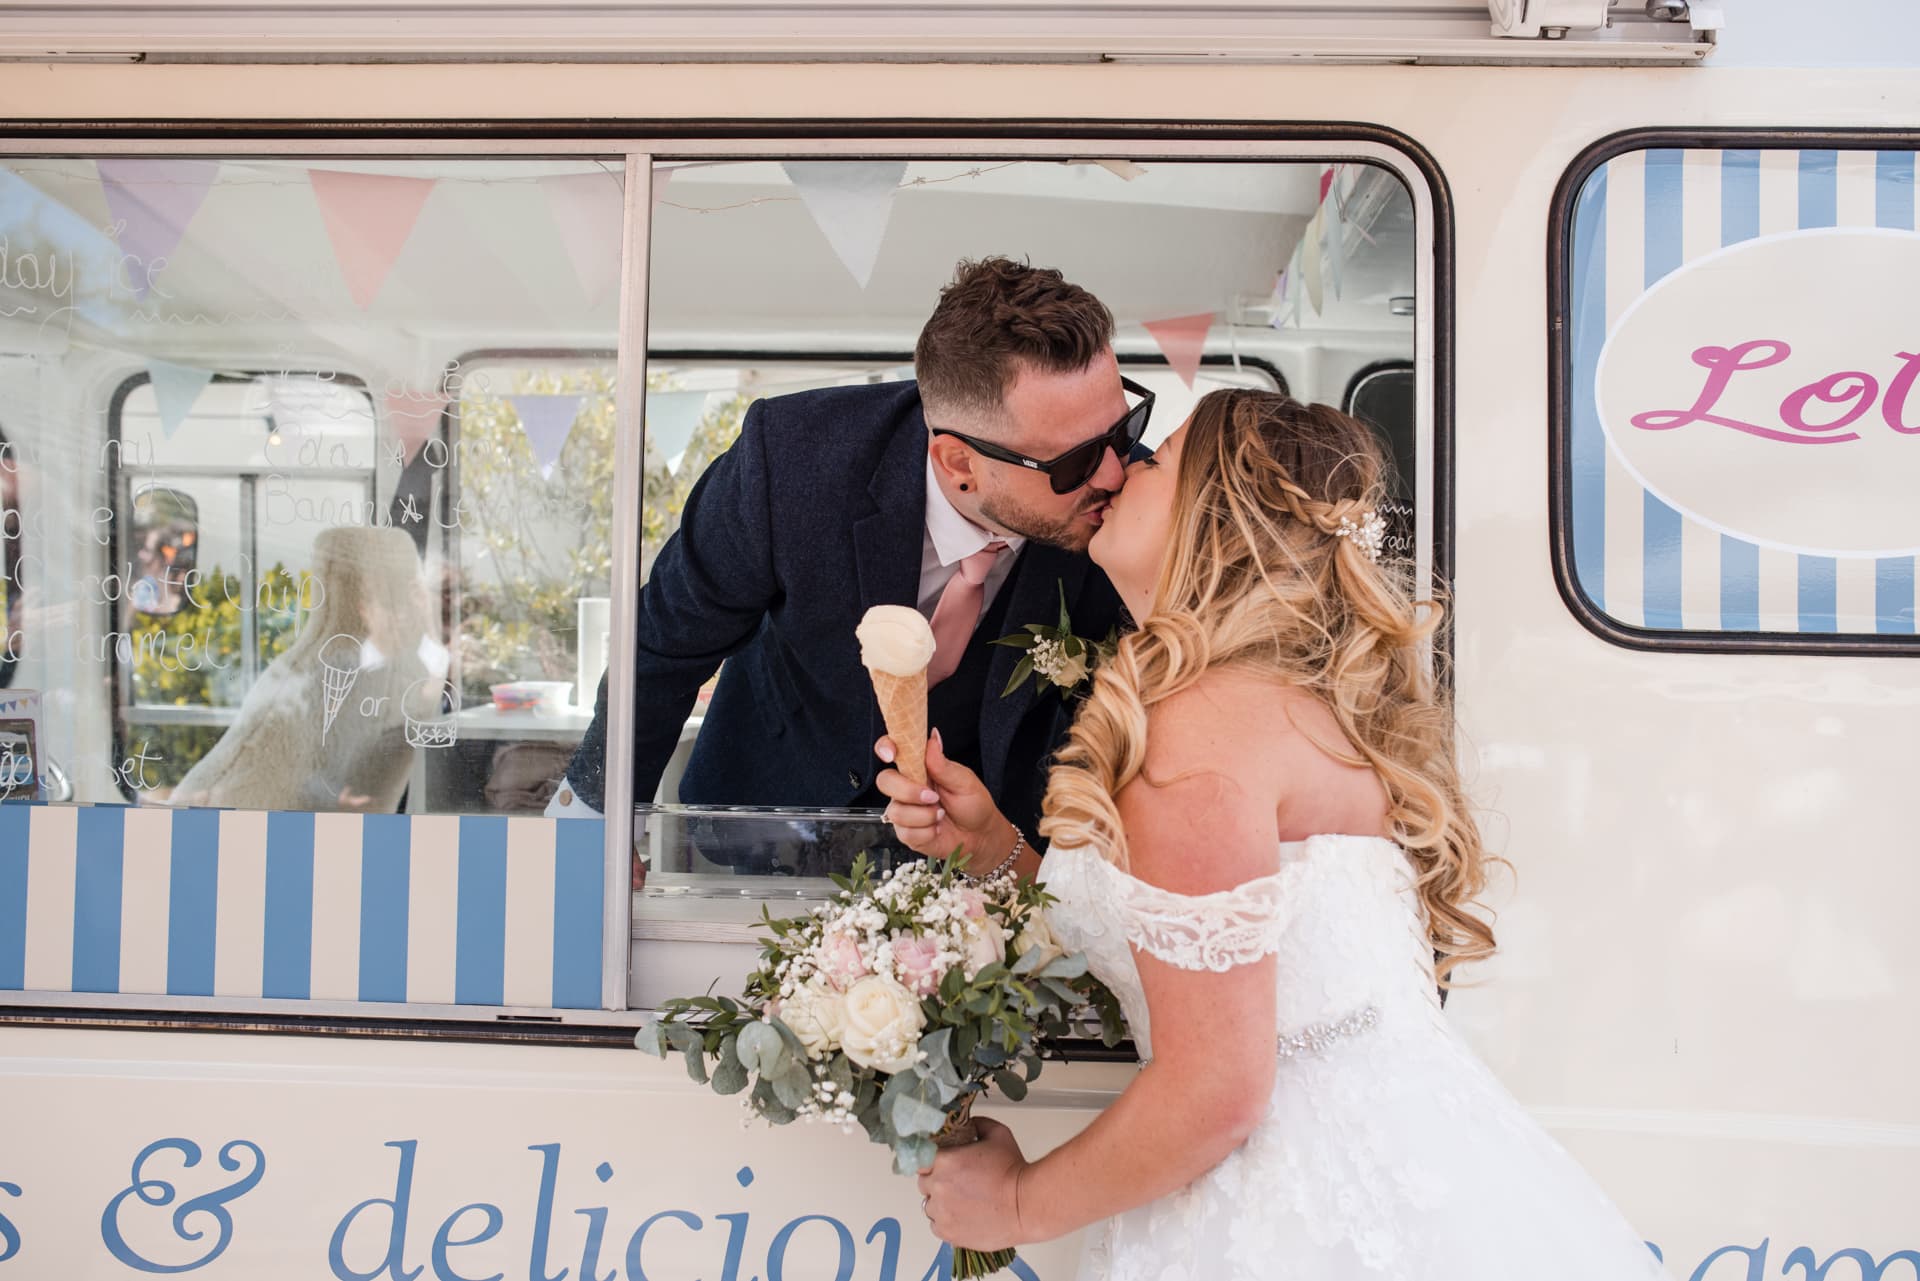 Bride and Groom kiss at the ice cream van in the Courtyard of Stratton Court Barn Wedding Venue